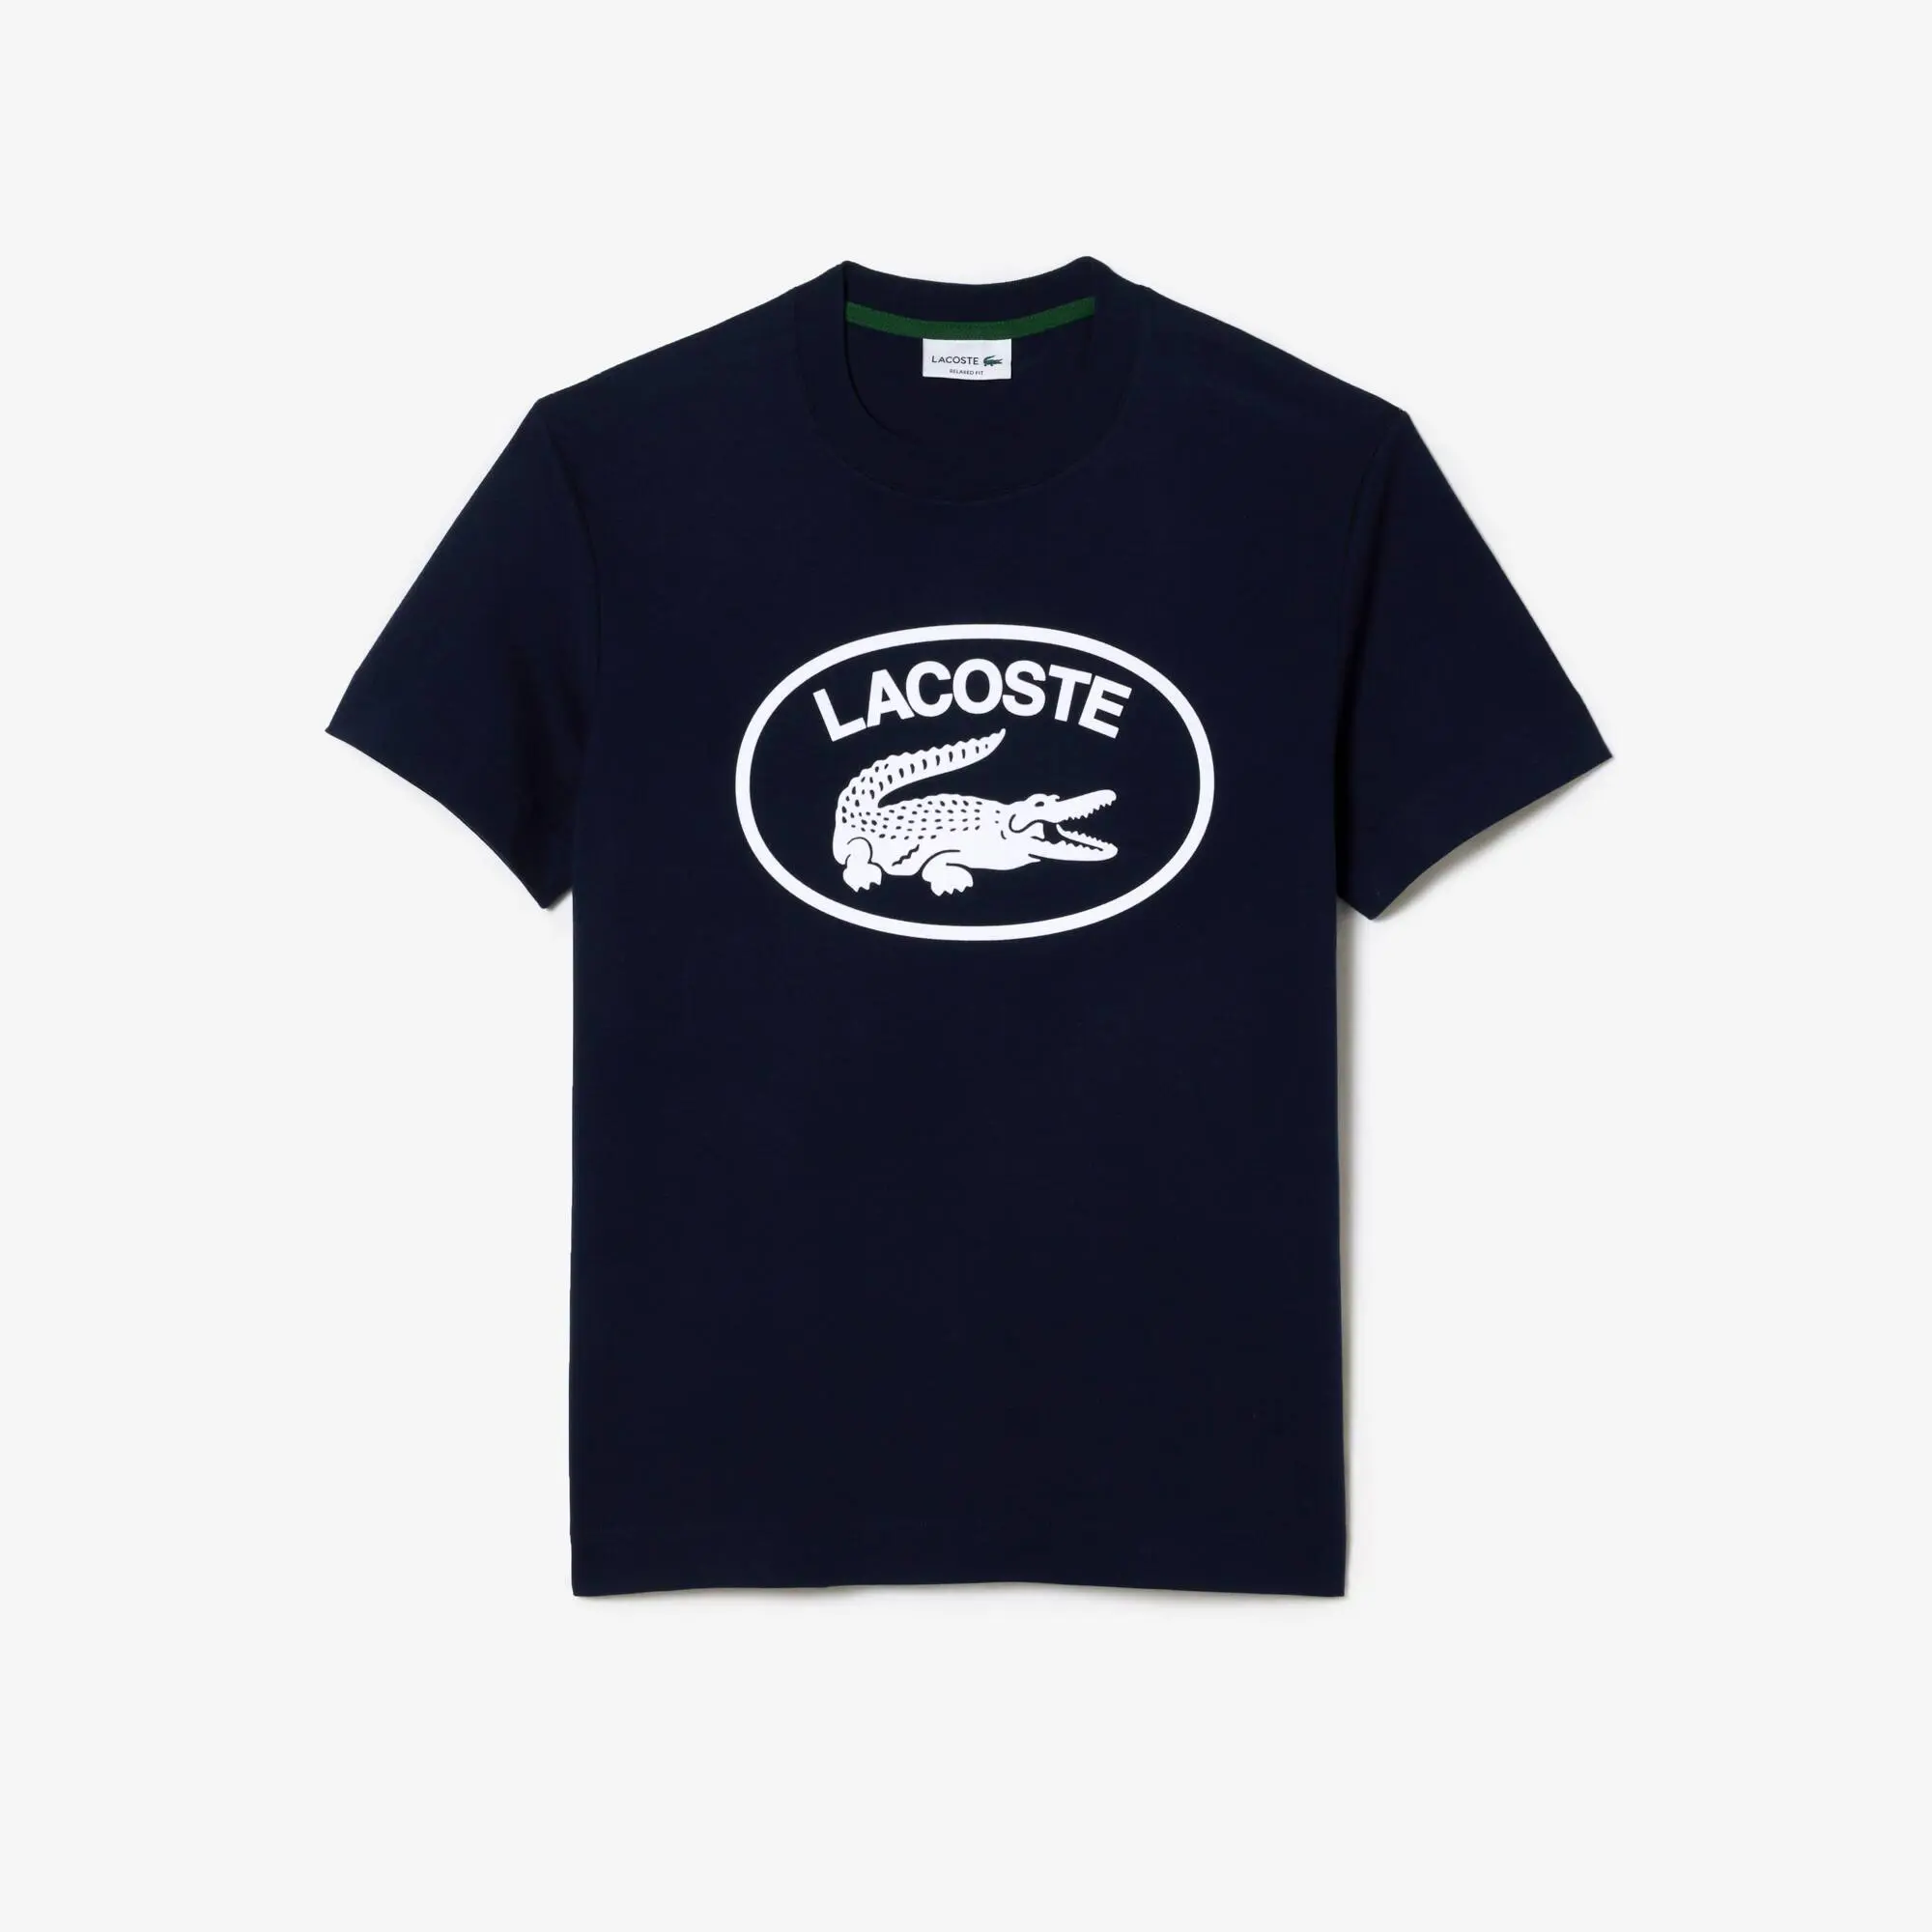 Lacoste Men's Lacoste Relaxed Fit Branded Cotton T-Shirt. 2